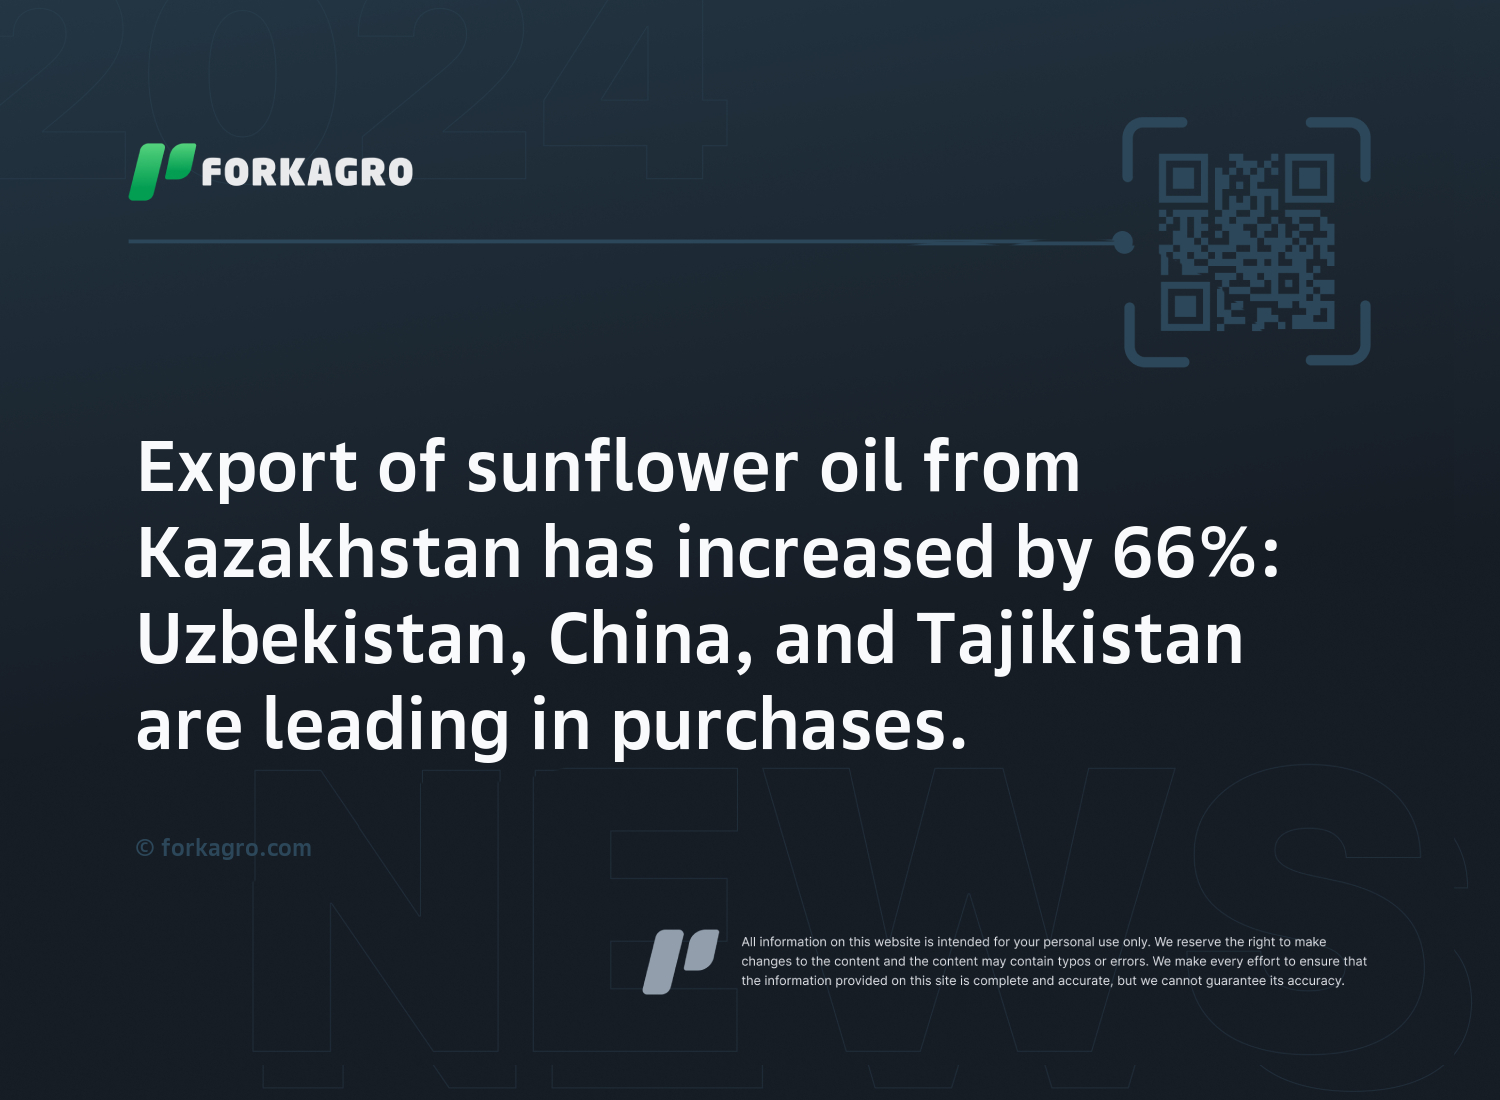 Export of sunflower oil from Kazakhstan has increased by 66%: Uzbekistan, China, and Tajikistan are leading in purchases.